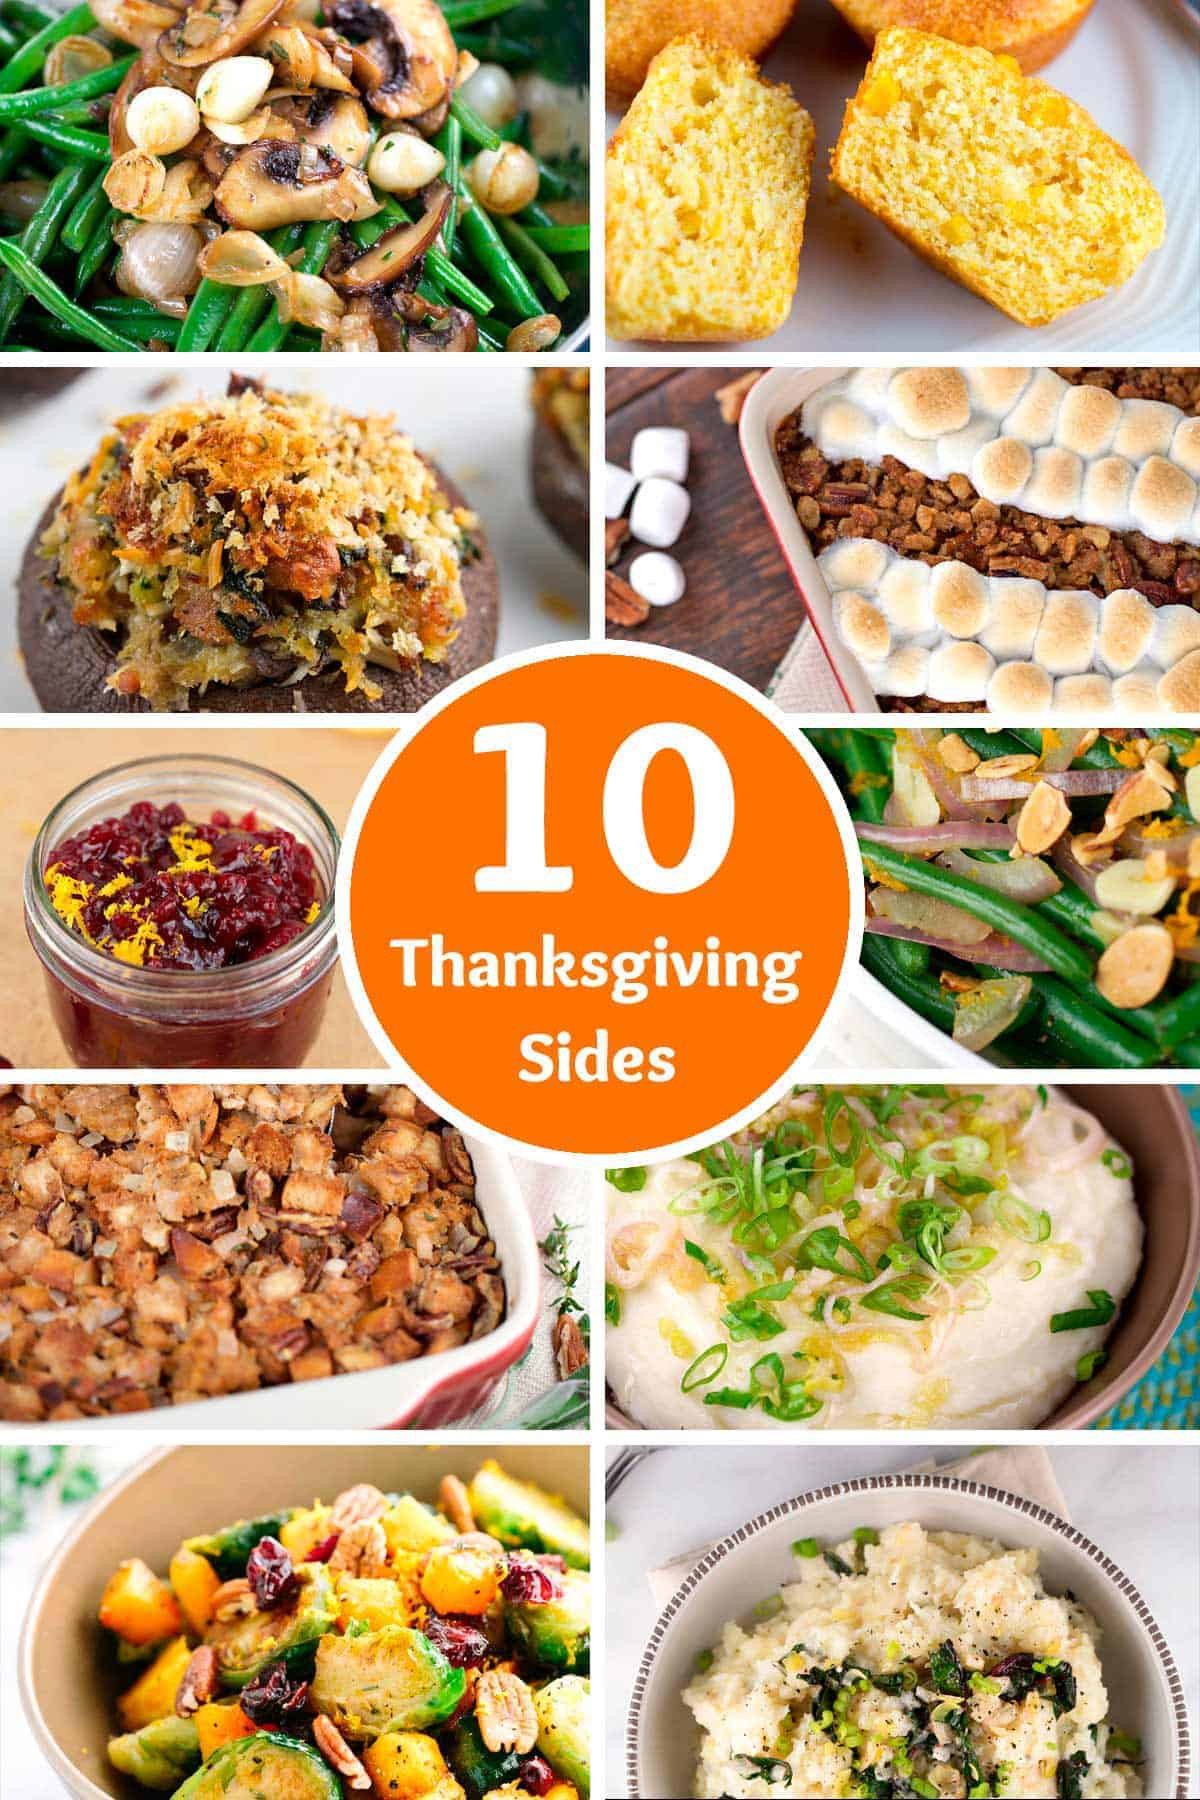 Easy Side Dishes For Thanksgiving
 10 Easy to Make Thanksgiving Side Dishes Jessica Gavin